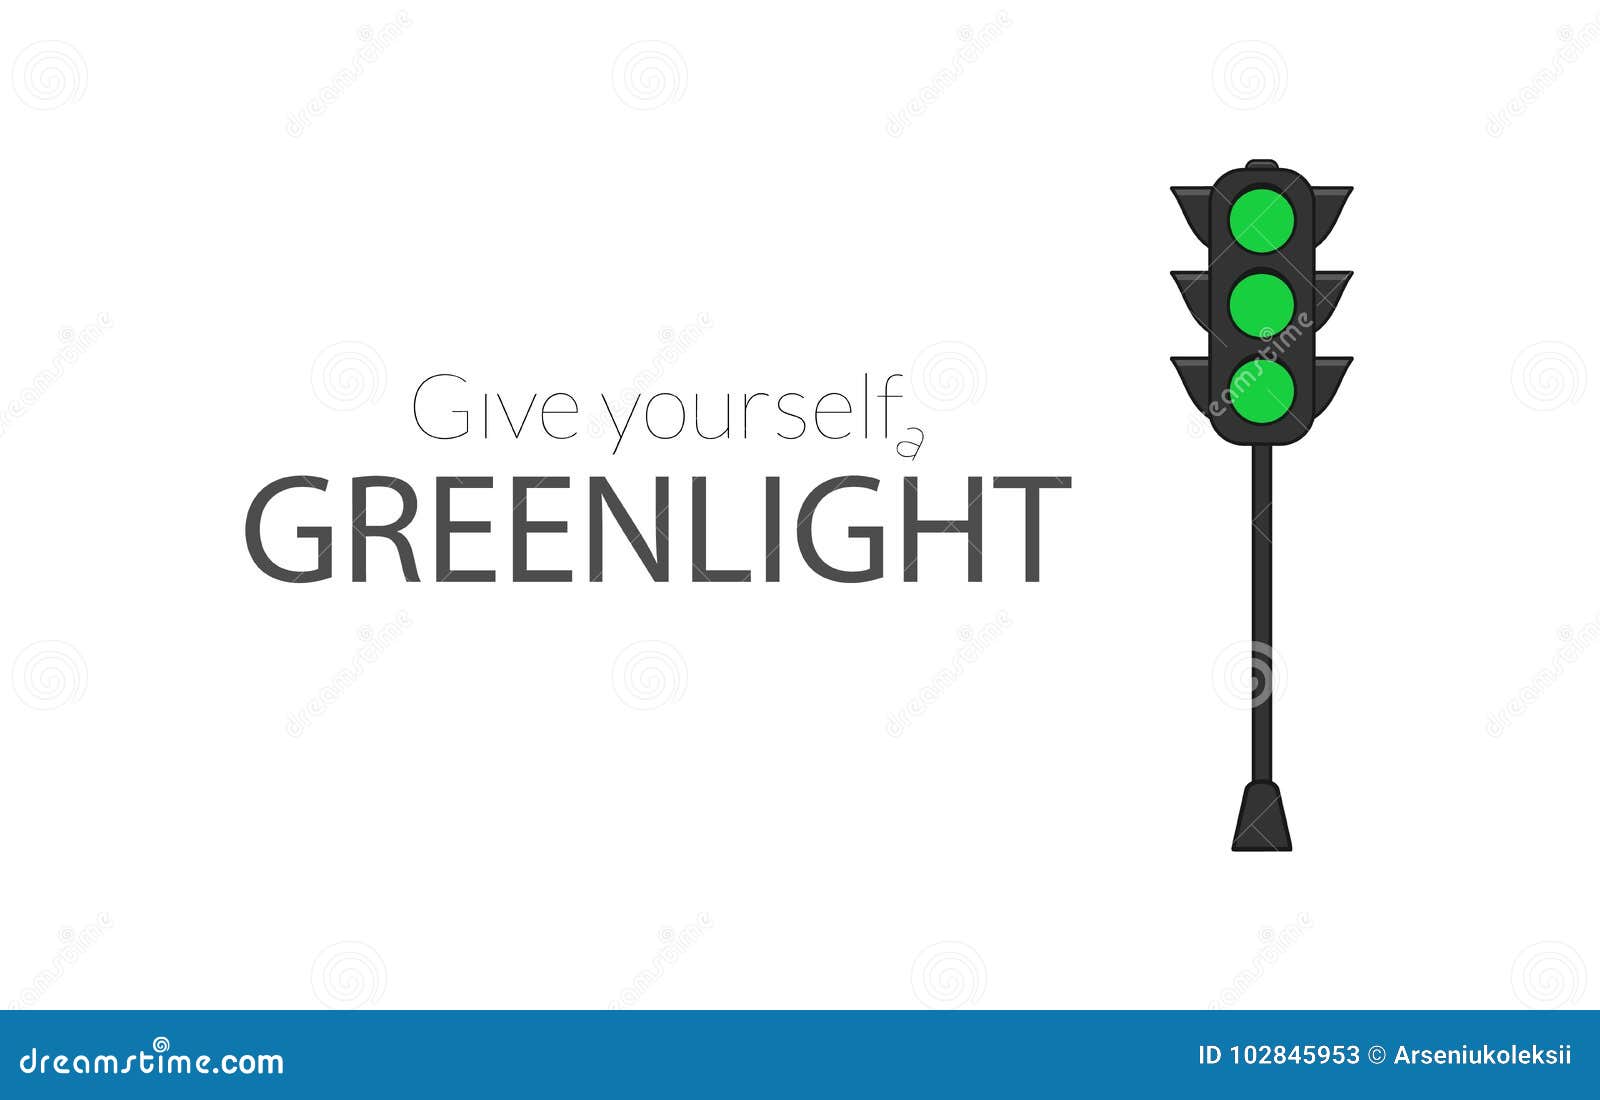 Give Green Stock Illustrations – 7 Yourself Green Light Stock Vectors & Clipart - Dreamstime